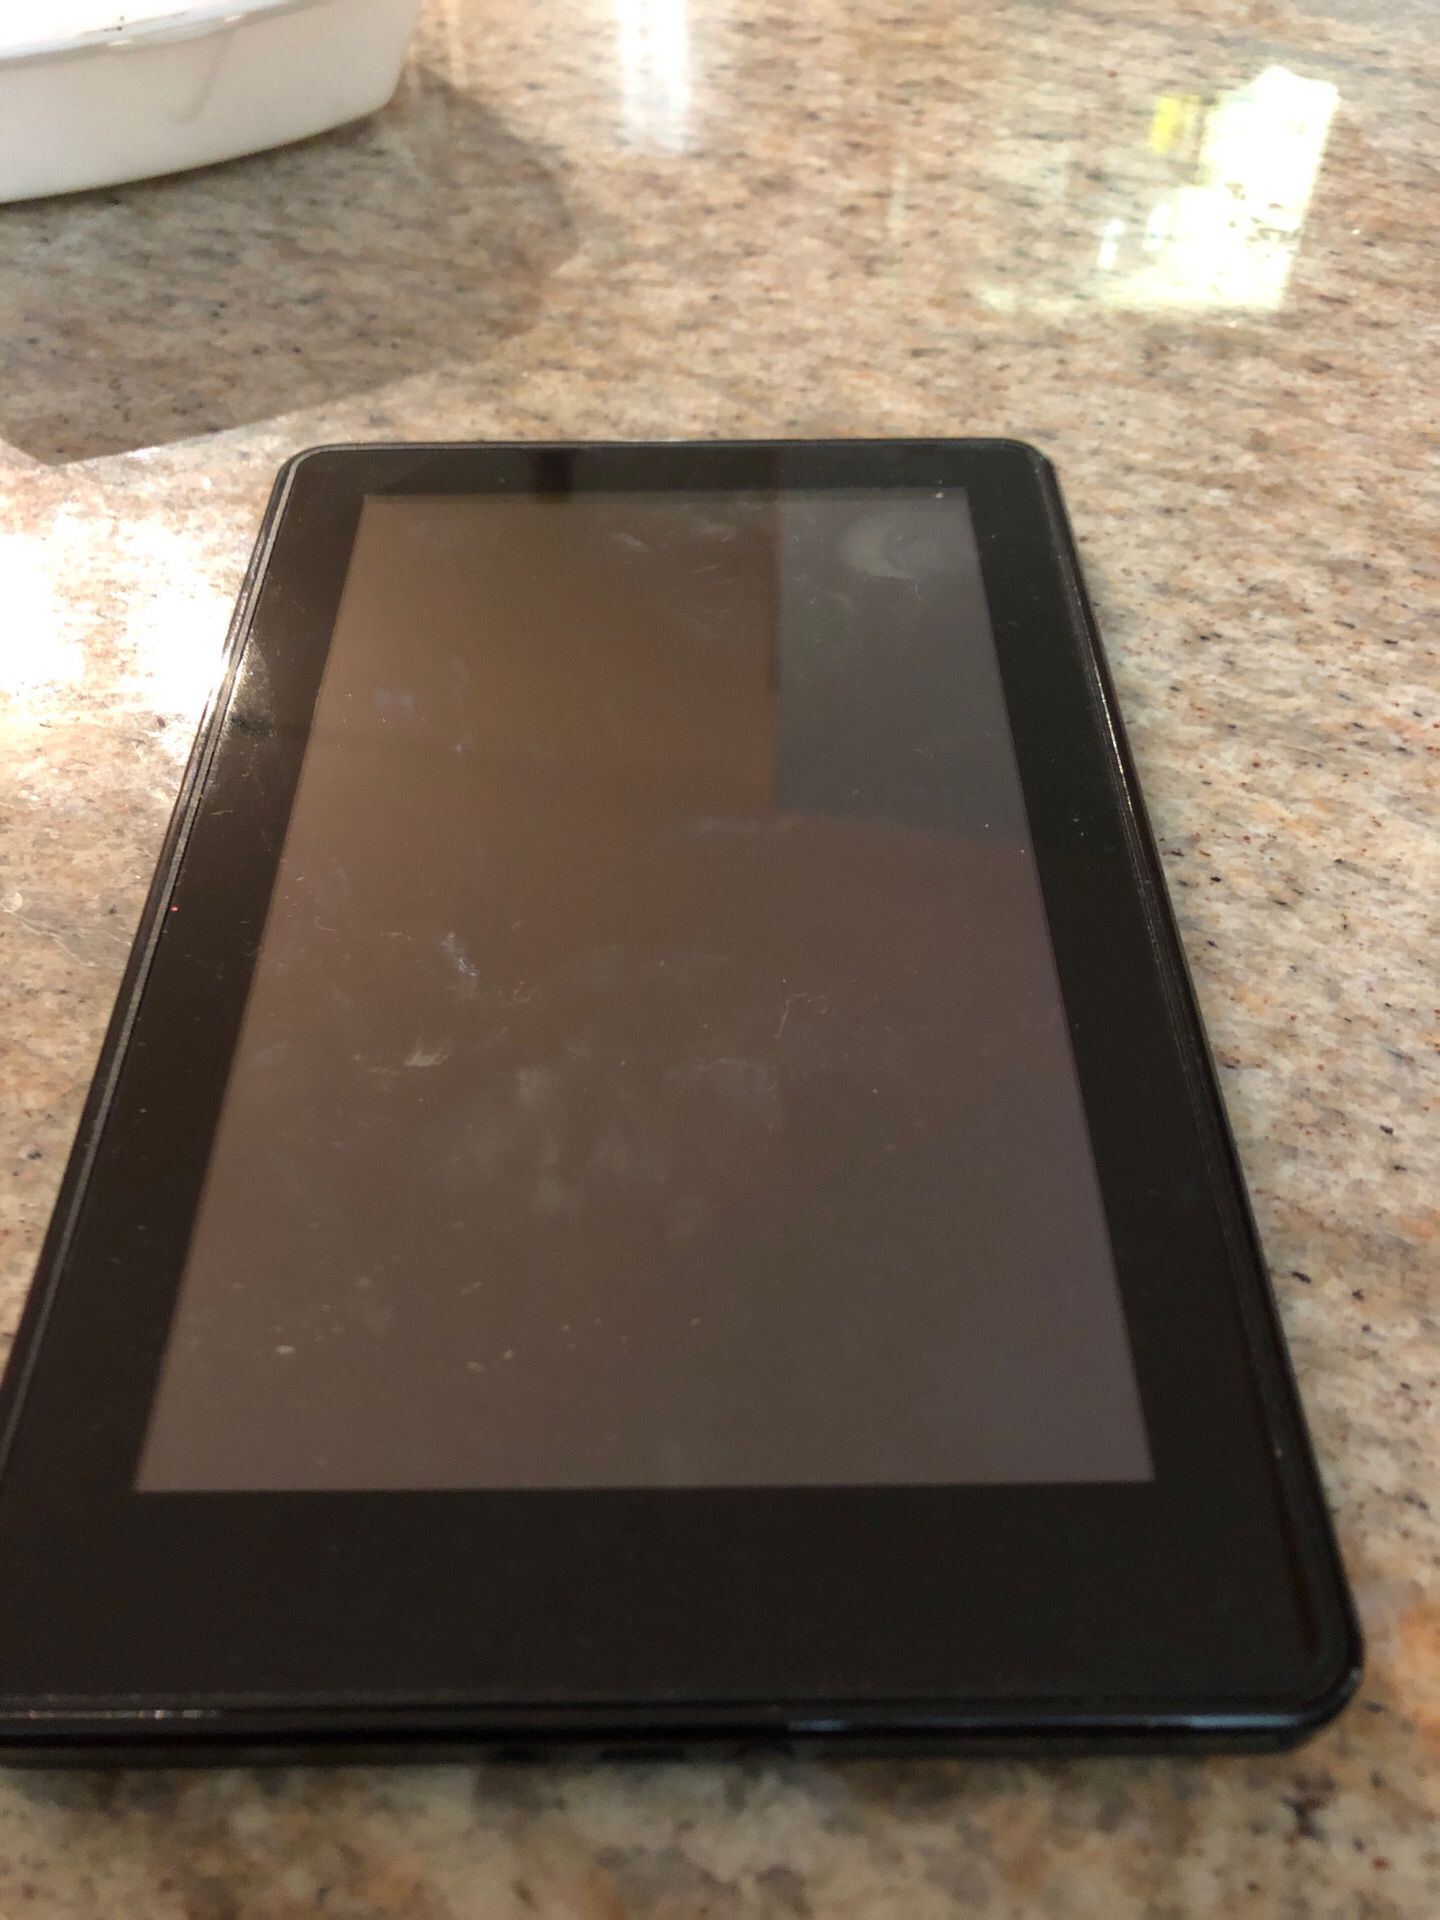 Kindle fire - perfect condition.